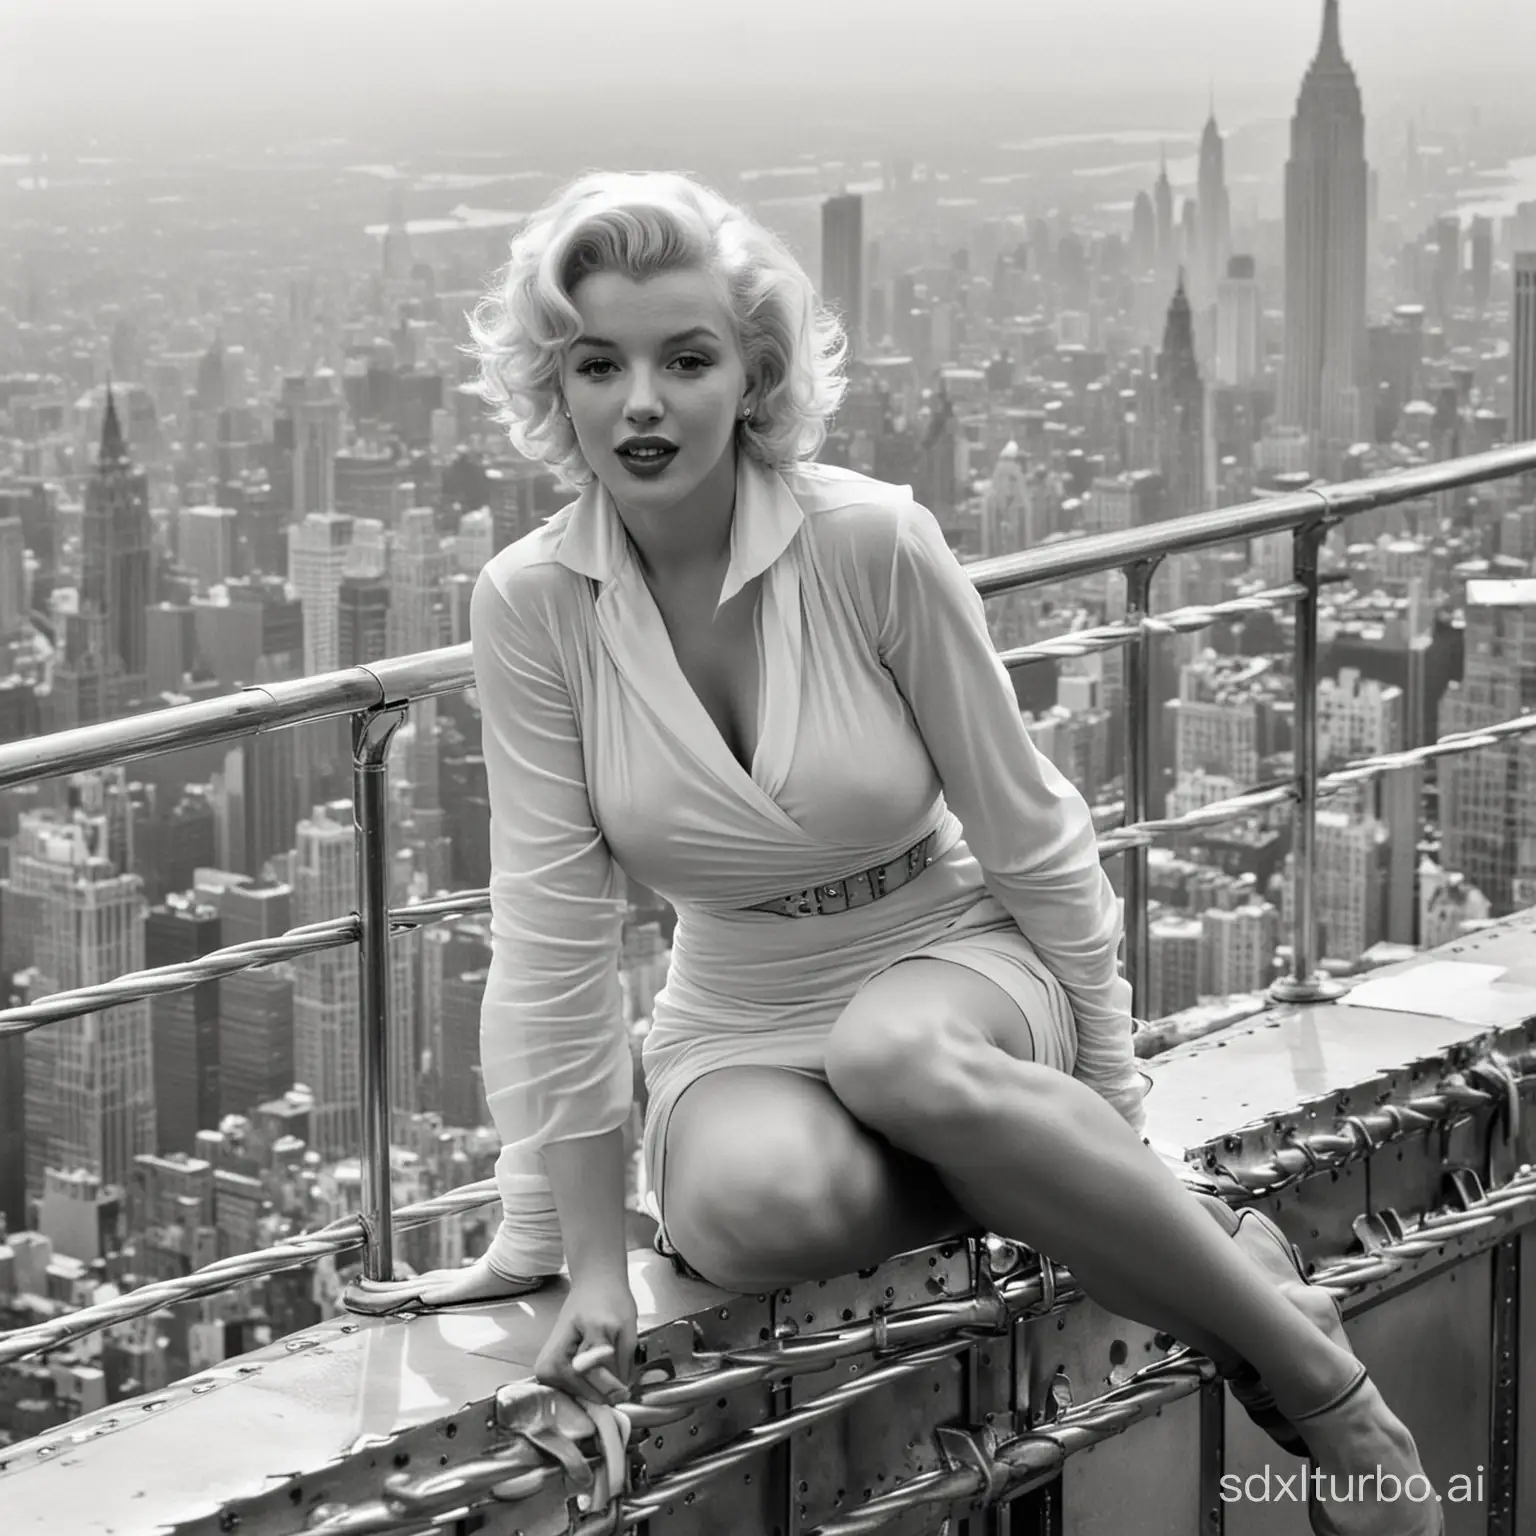 Marilyn Monroe on the top rail of the observation deck of the Empire State Building. She is in the missionary position 